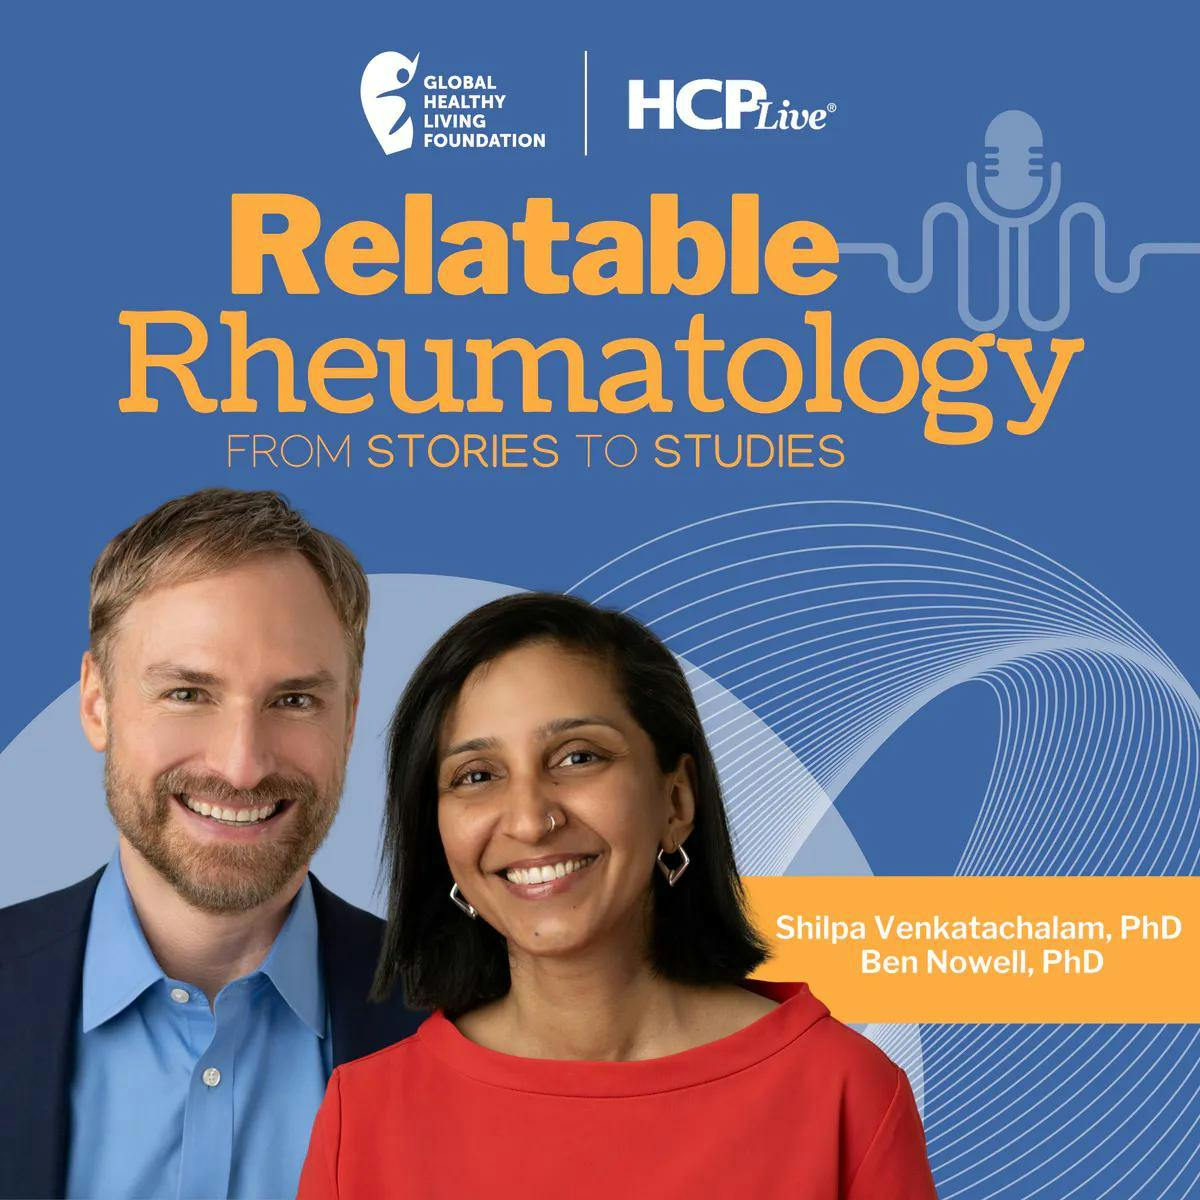 Relatable Rheumatology: From Stories to Studies